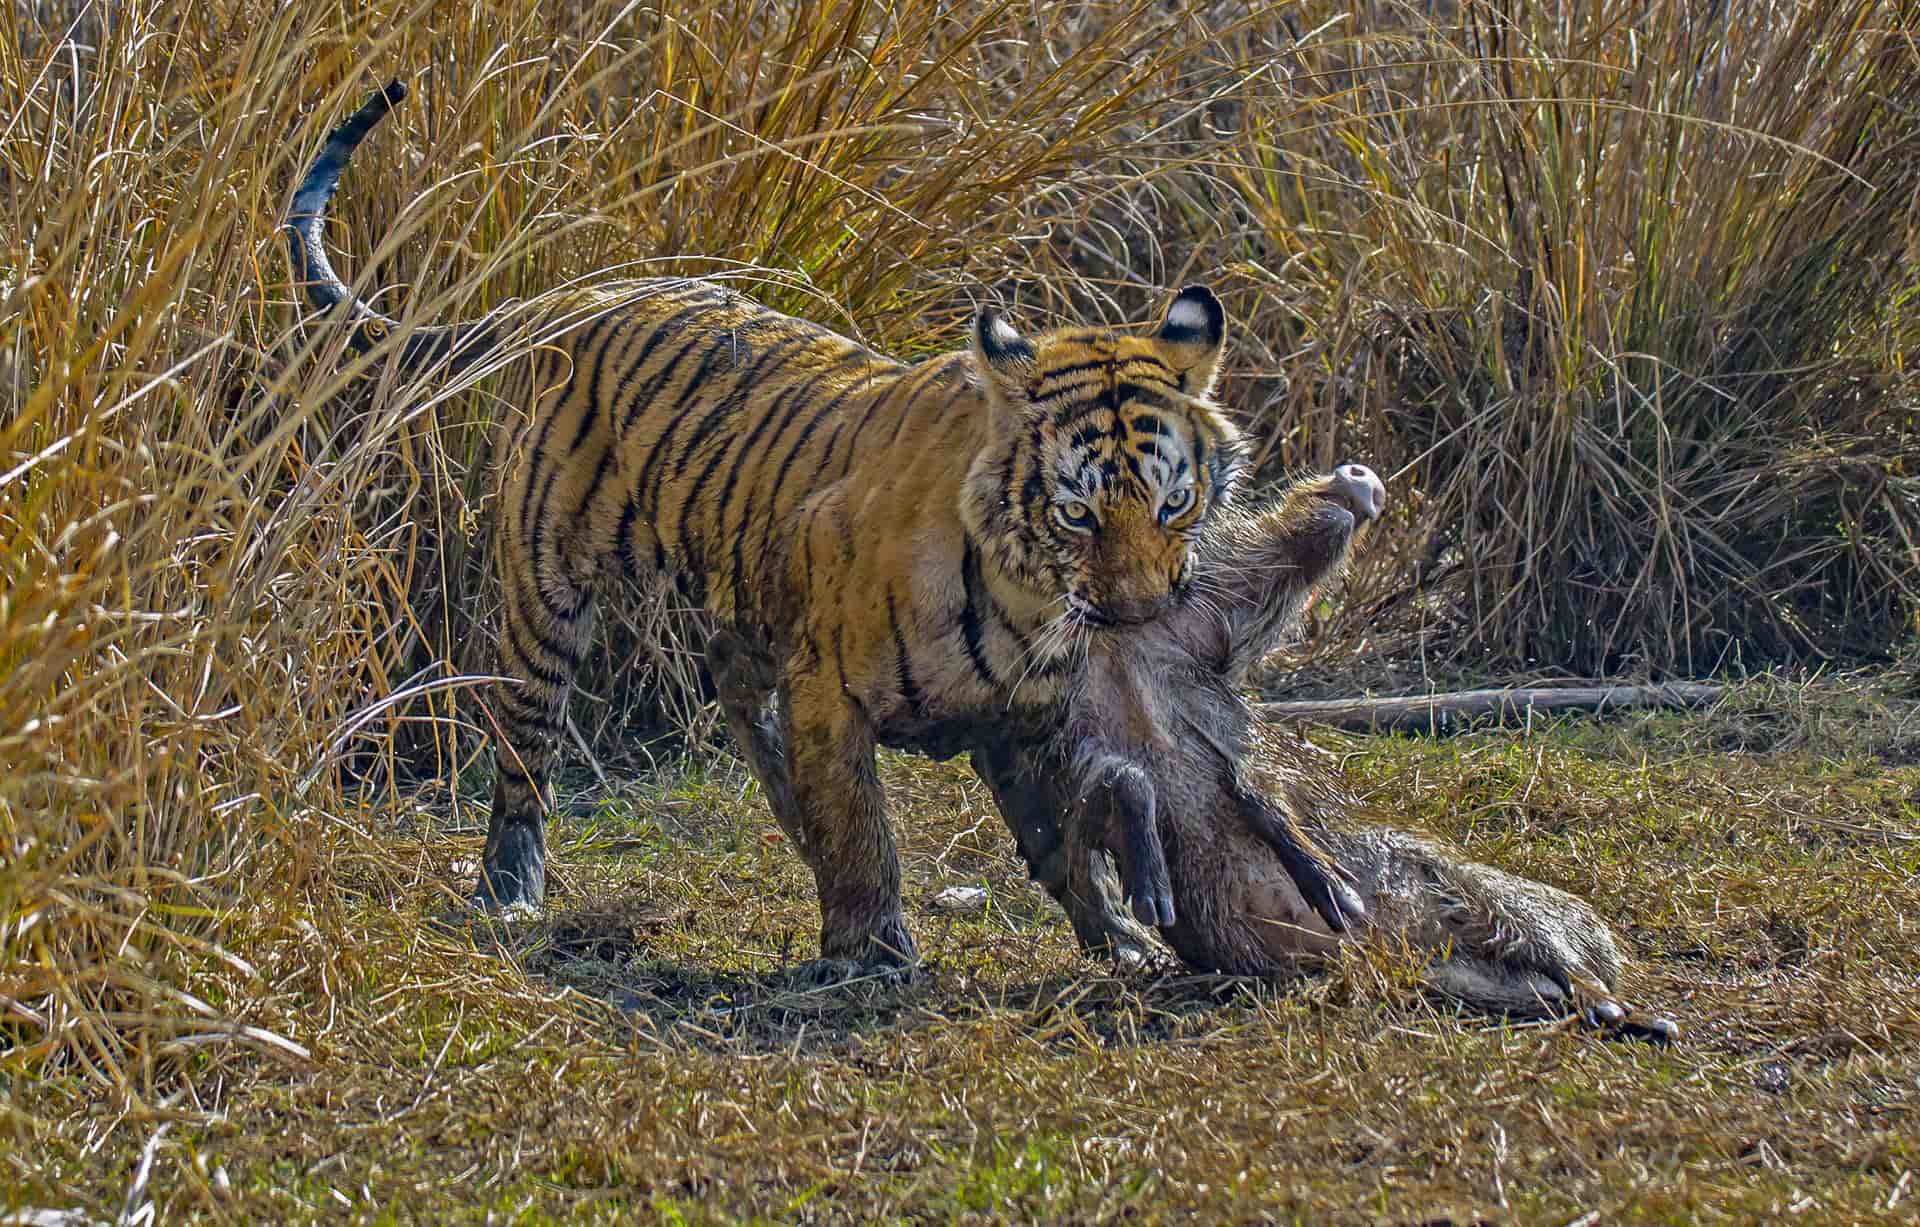 Royal Bengal Tiger - Facts, Habitat and Information in Nepal